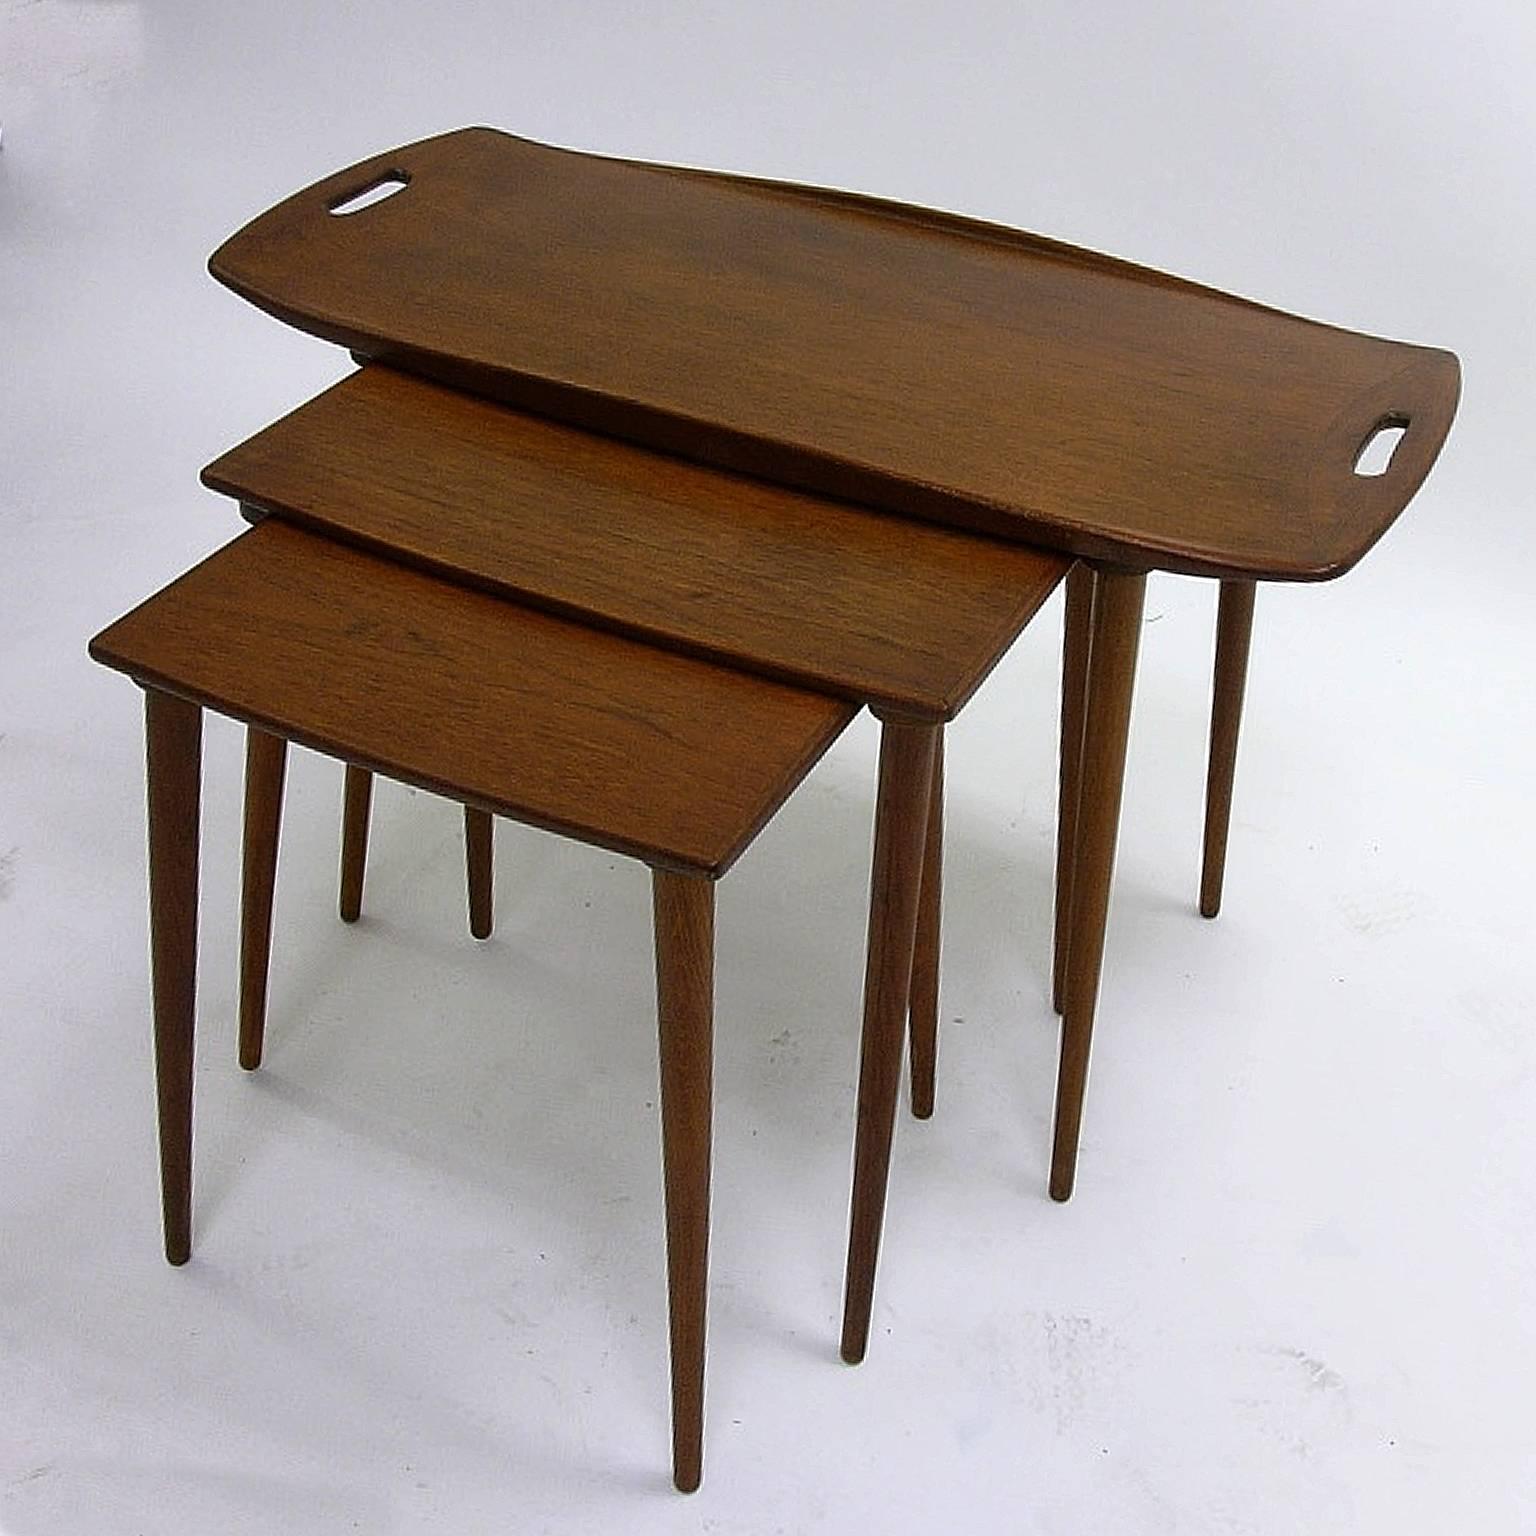 Fantastic set of Danish nesting tables designed by Jens Quistgaard.
Measurements of each table or Stand are:
31 1/8